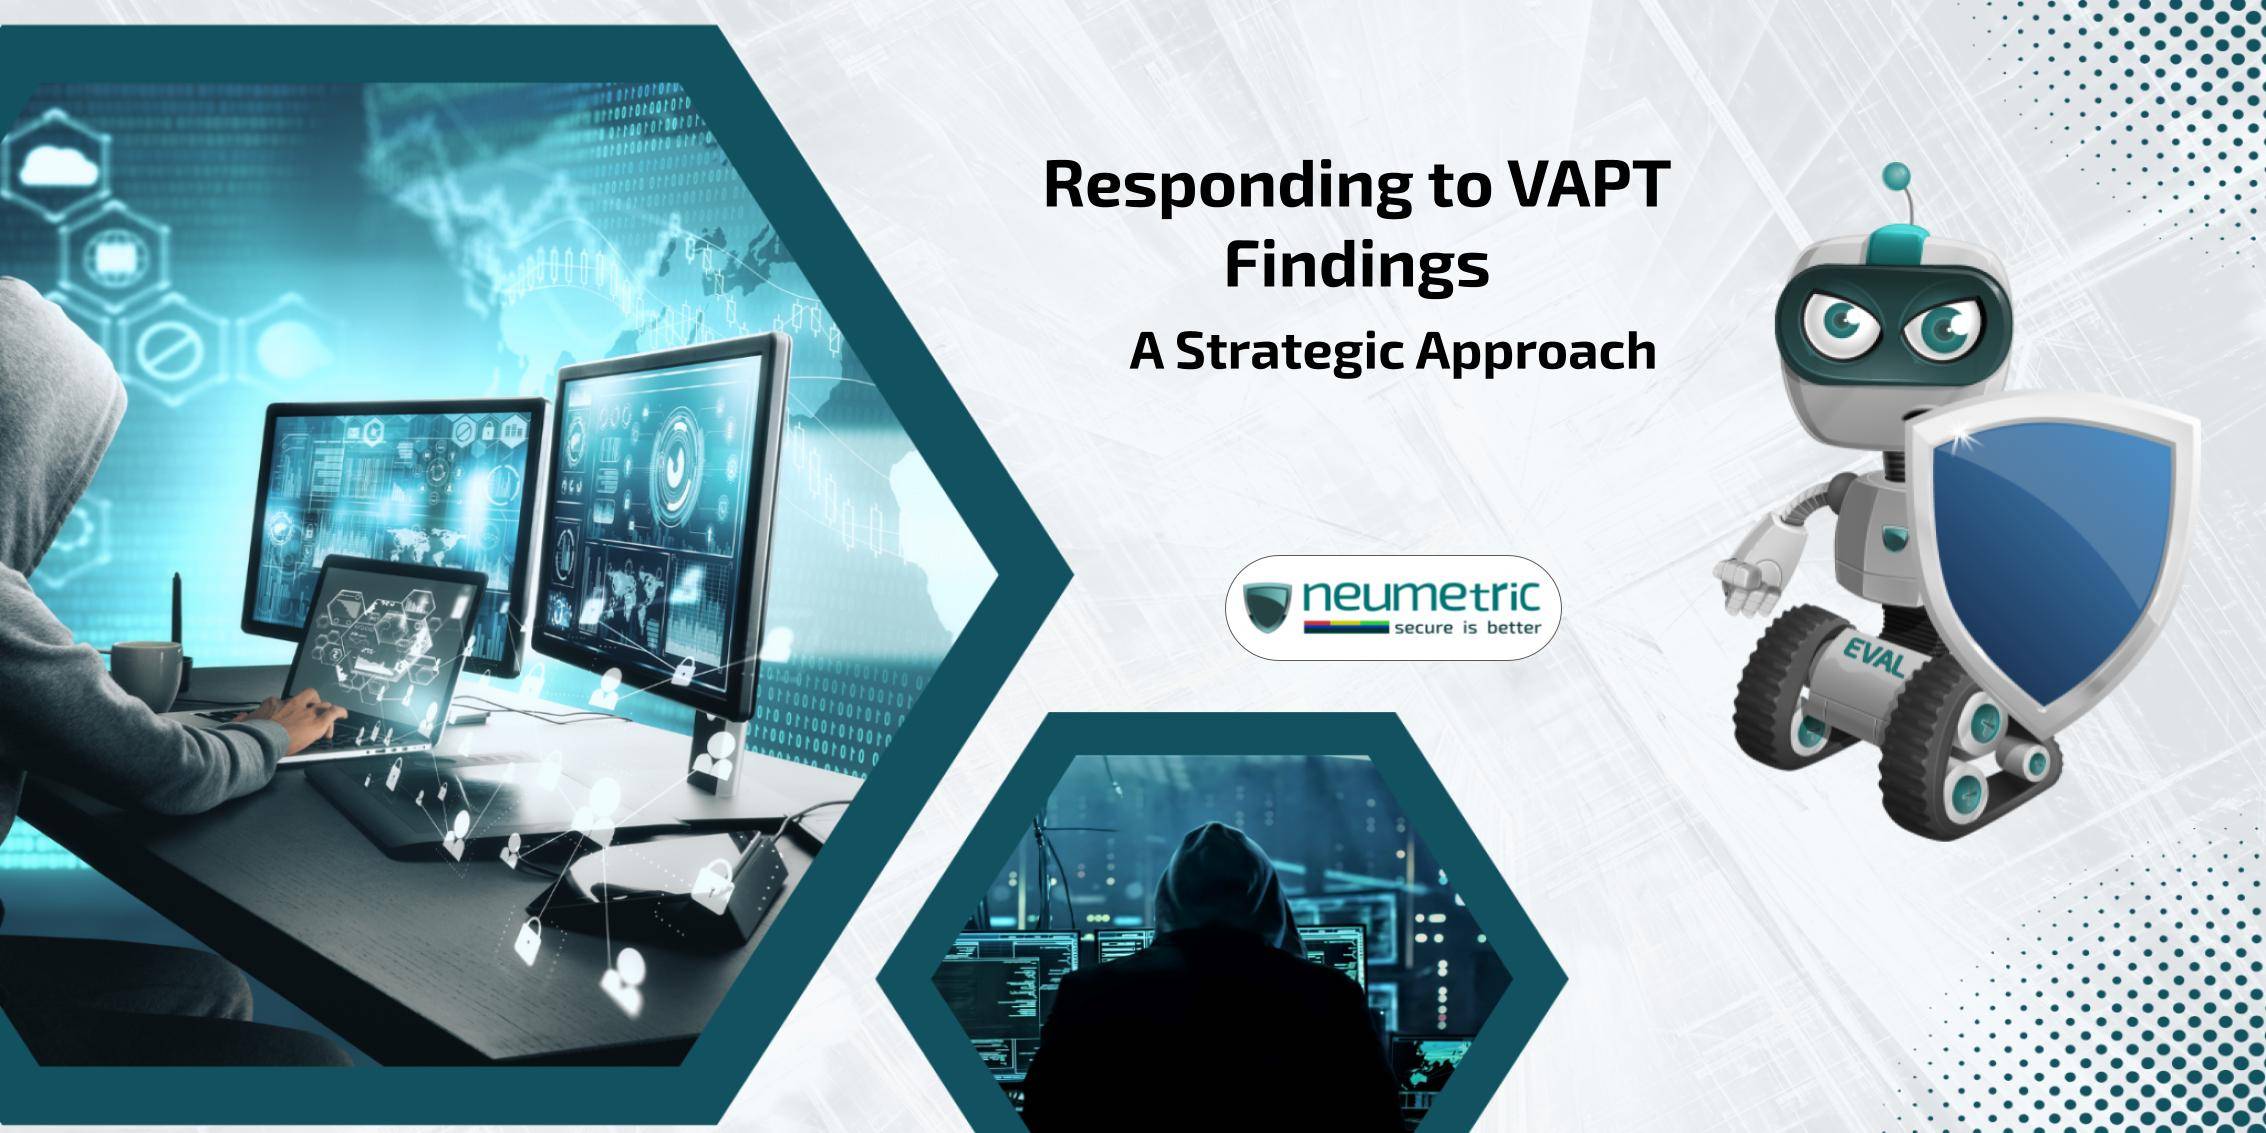 Responding to VAPT findings: A strategic approach